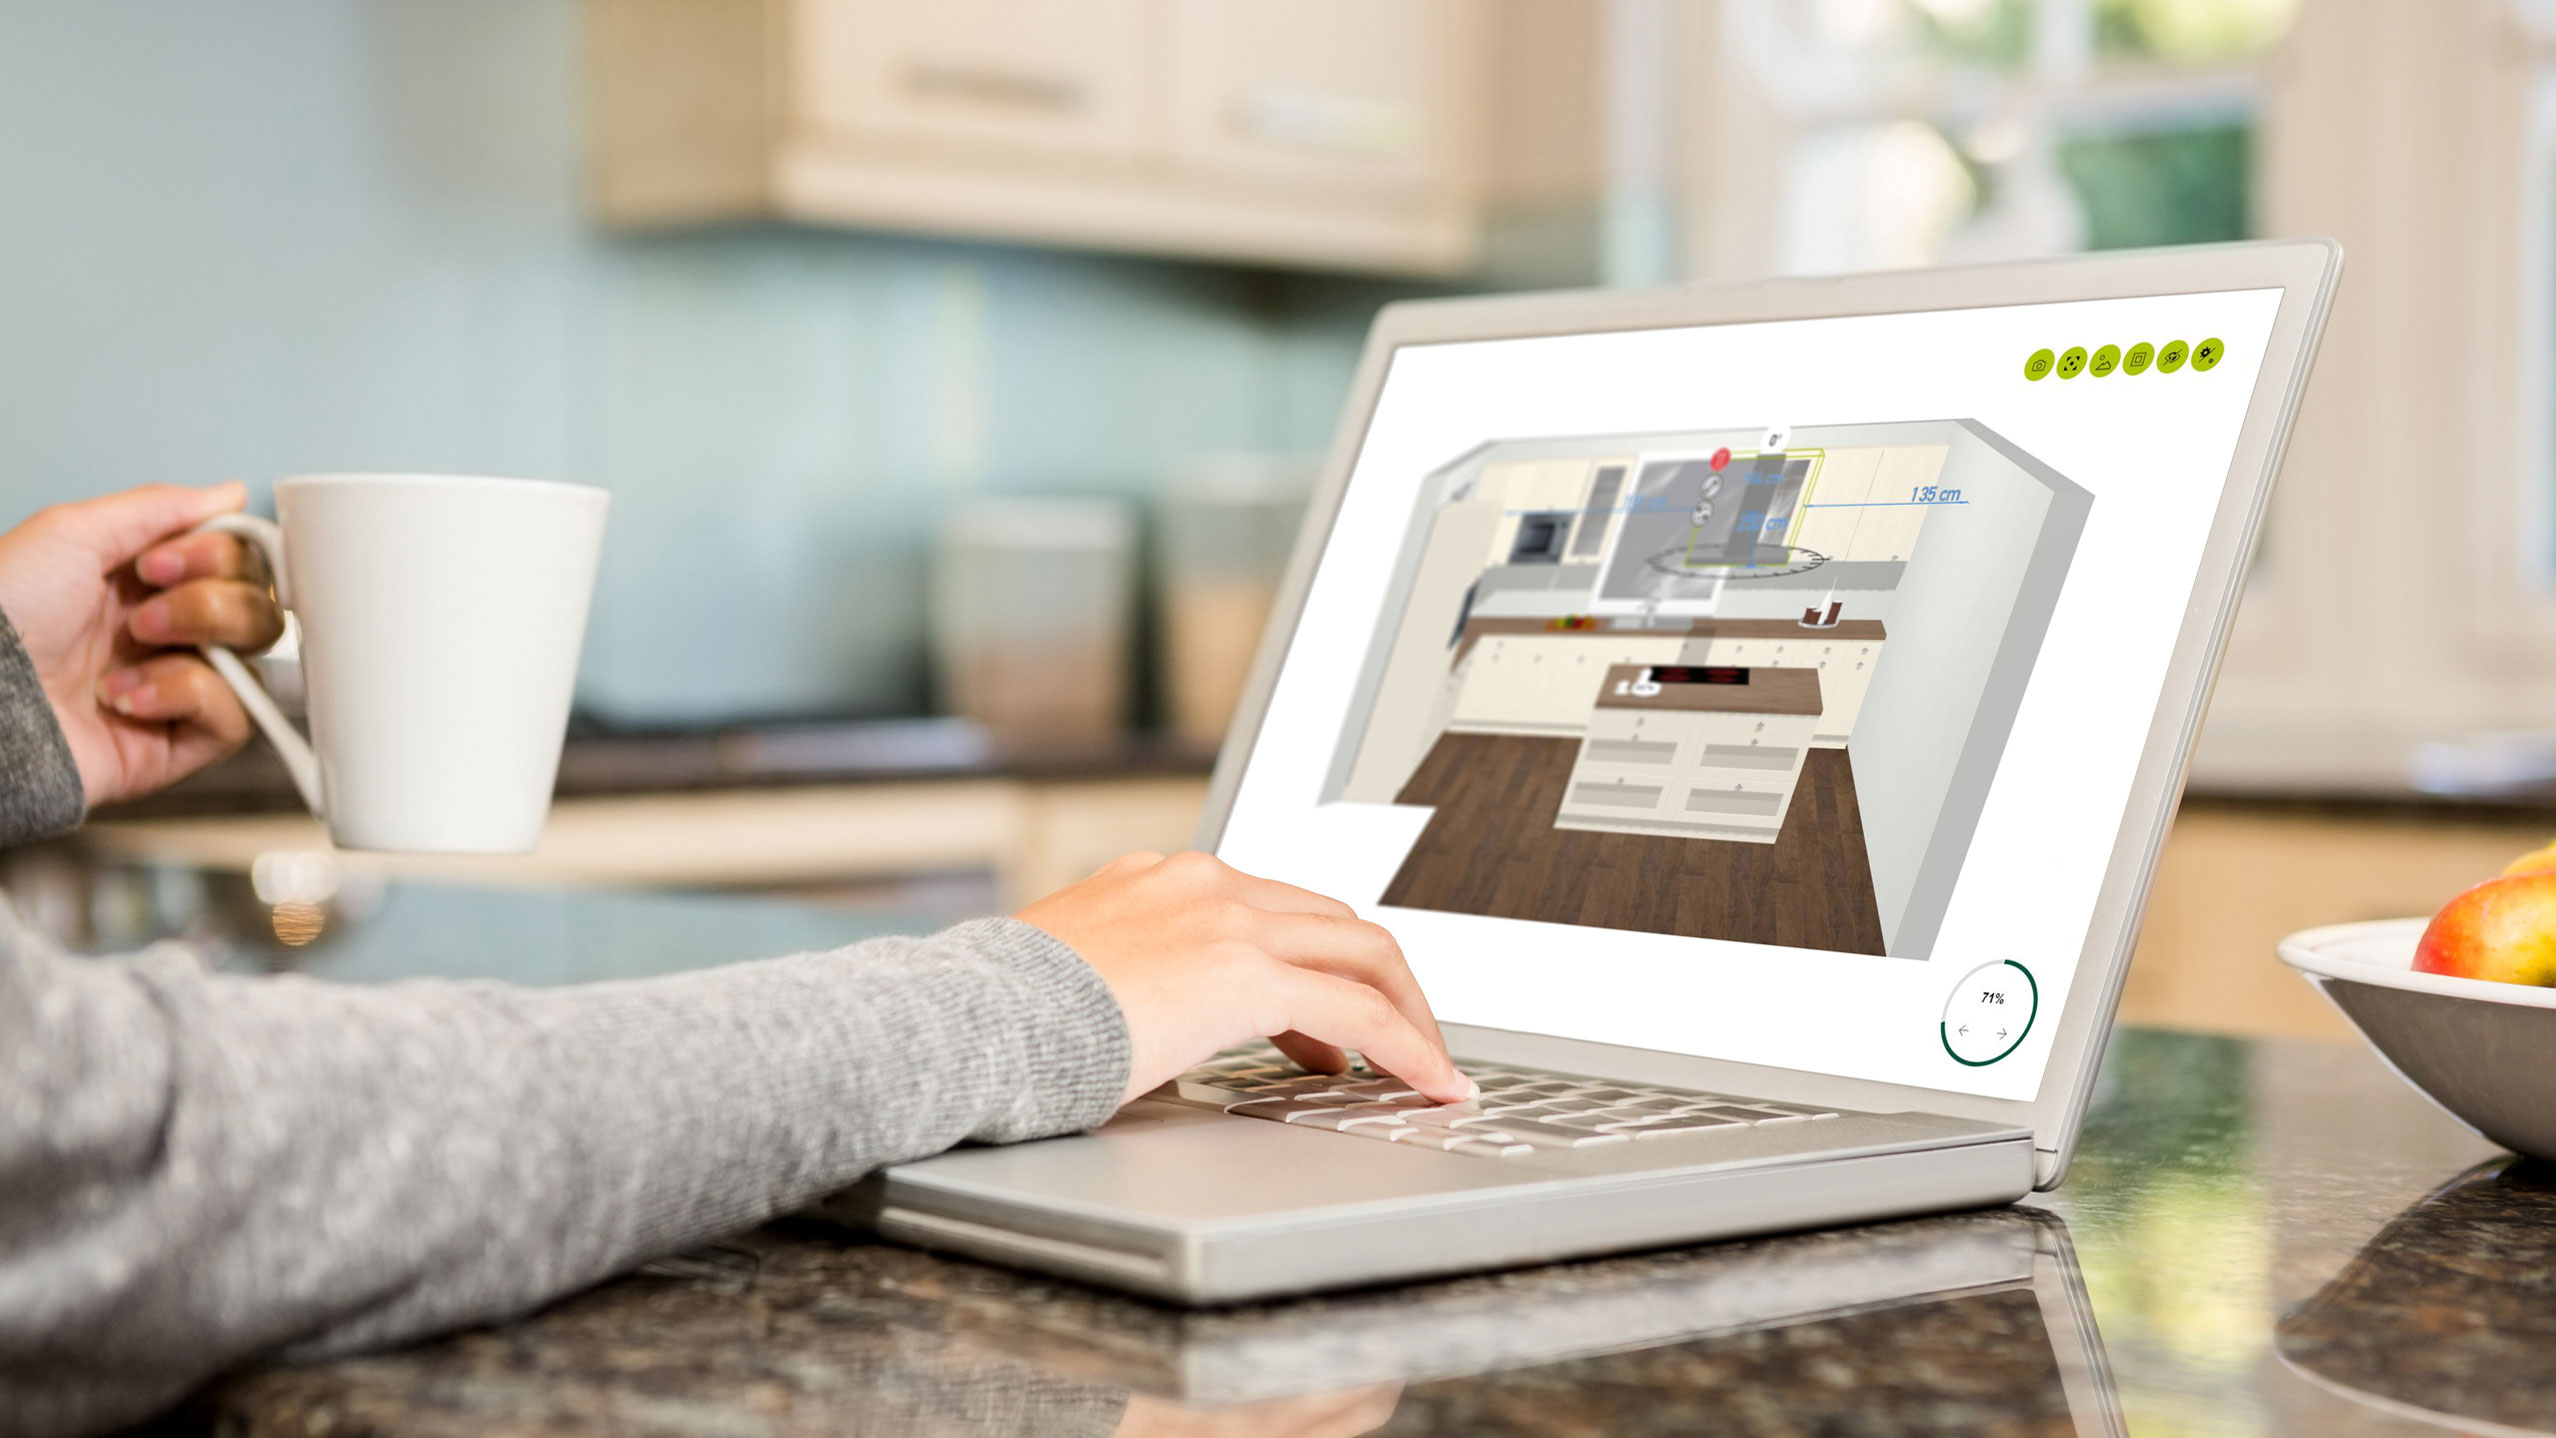 image of person using laptop to view 3d model of kitchen layout.